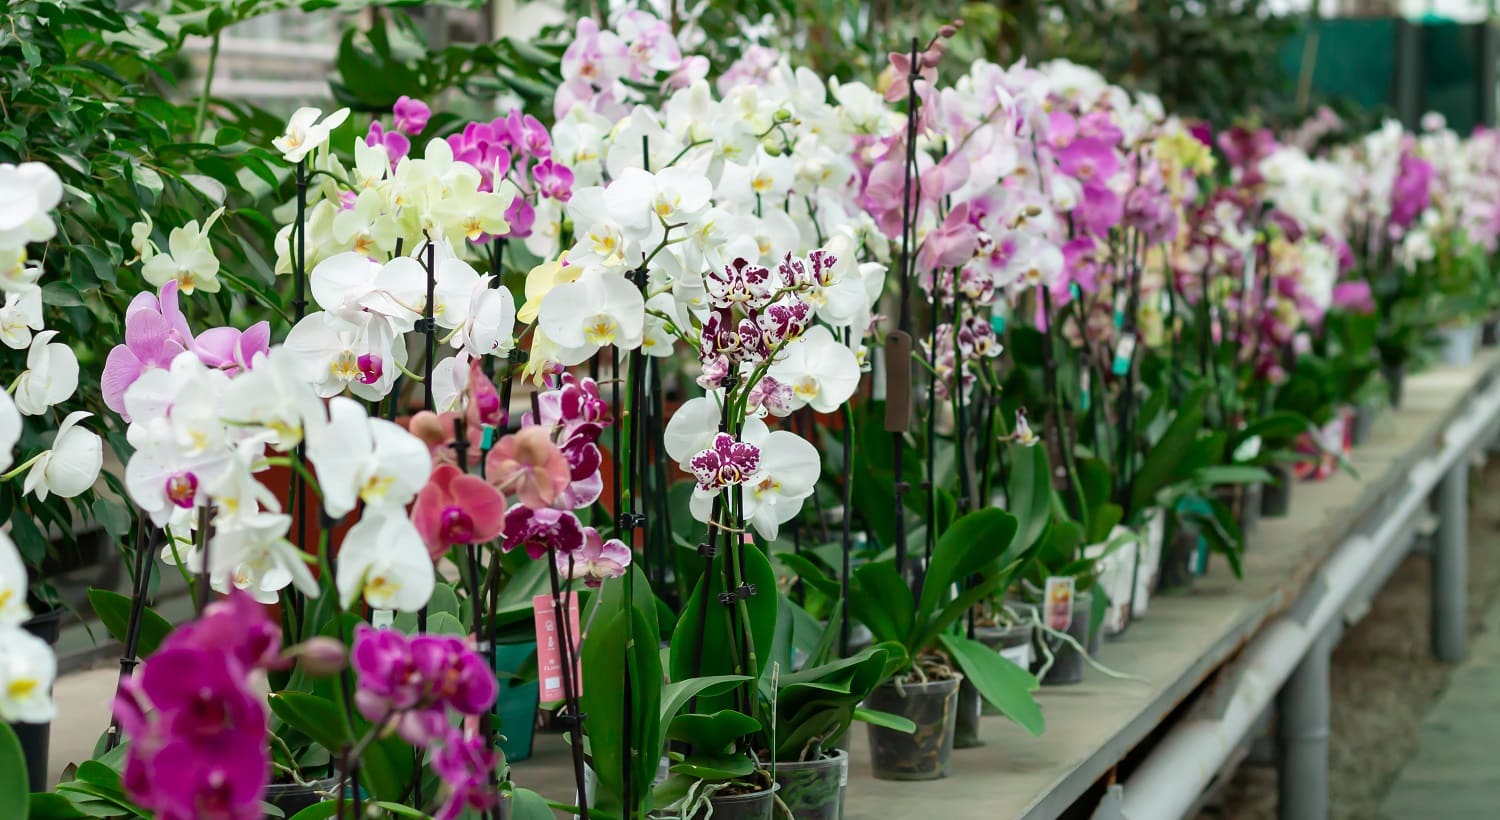 Potted orchids on counter in store. Phalaenopsis flowers of different colors